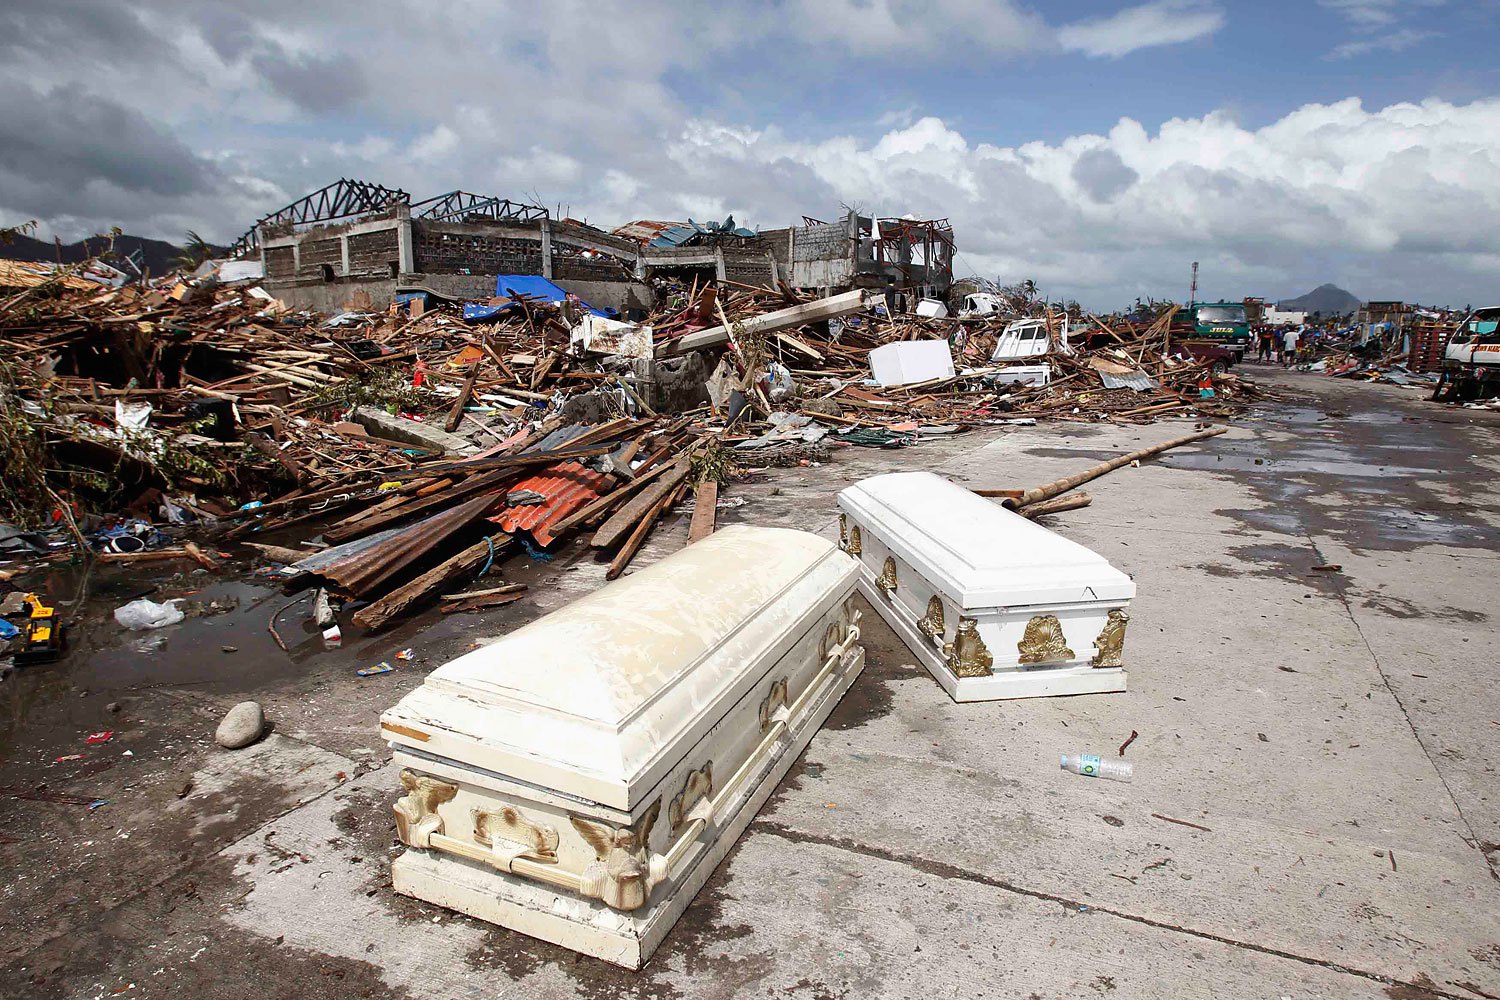 Empty coffins lie on a street near ruined houses on Nov. 10, 2013, after Supertyphoon Haiyan battered the city of Tacloban, in central Philippines